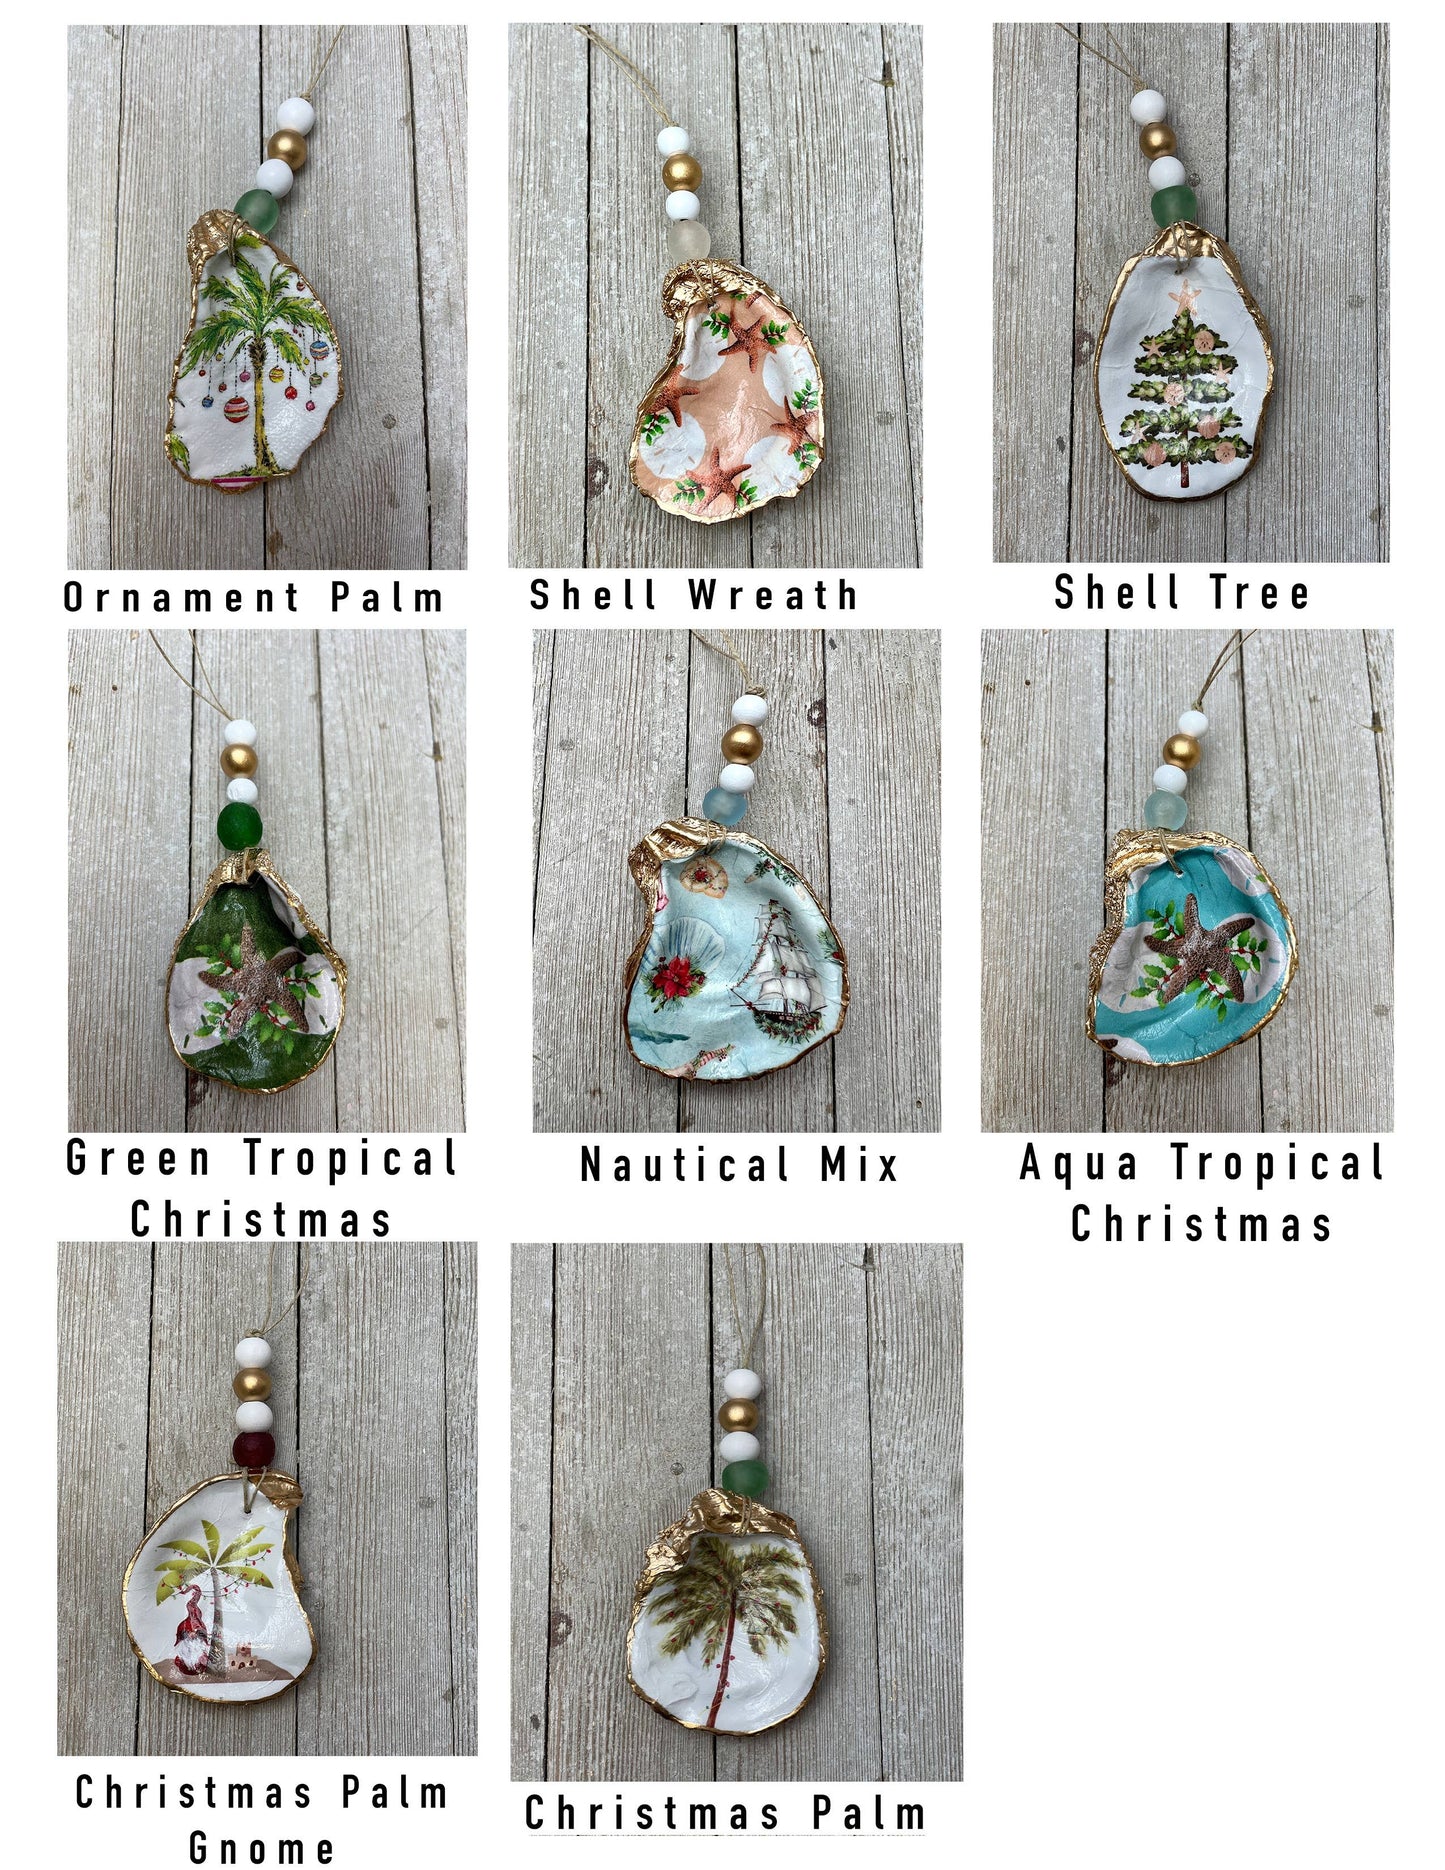 Oyster Ornaments- Decoupage Christmas Designs: Pinecone 1